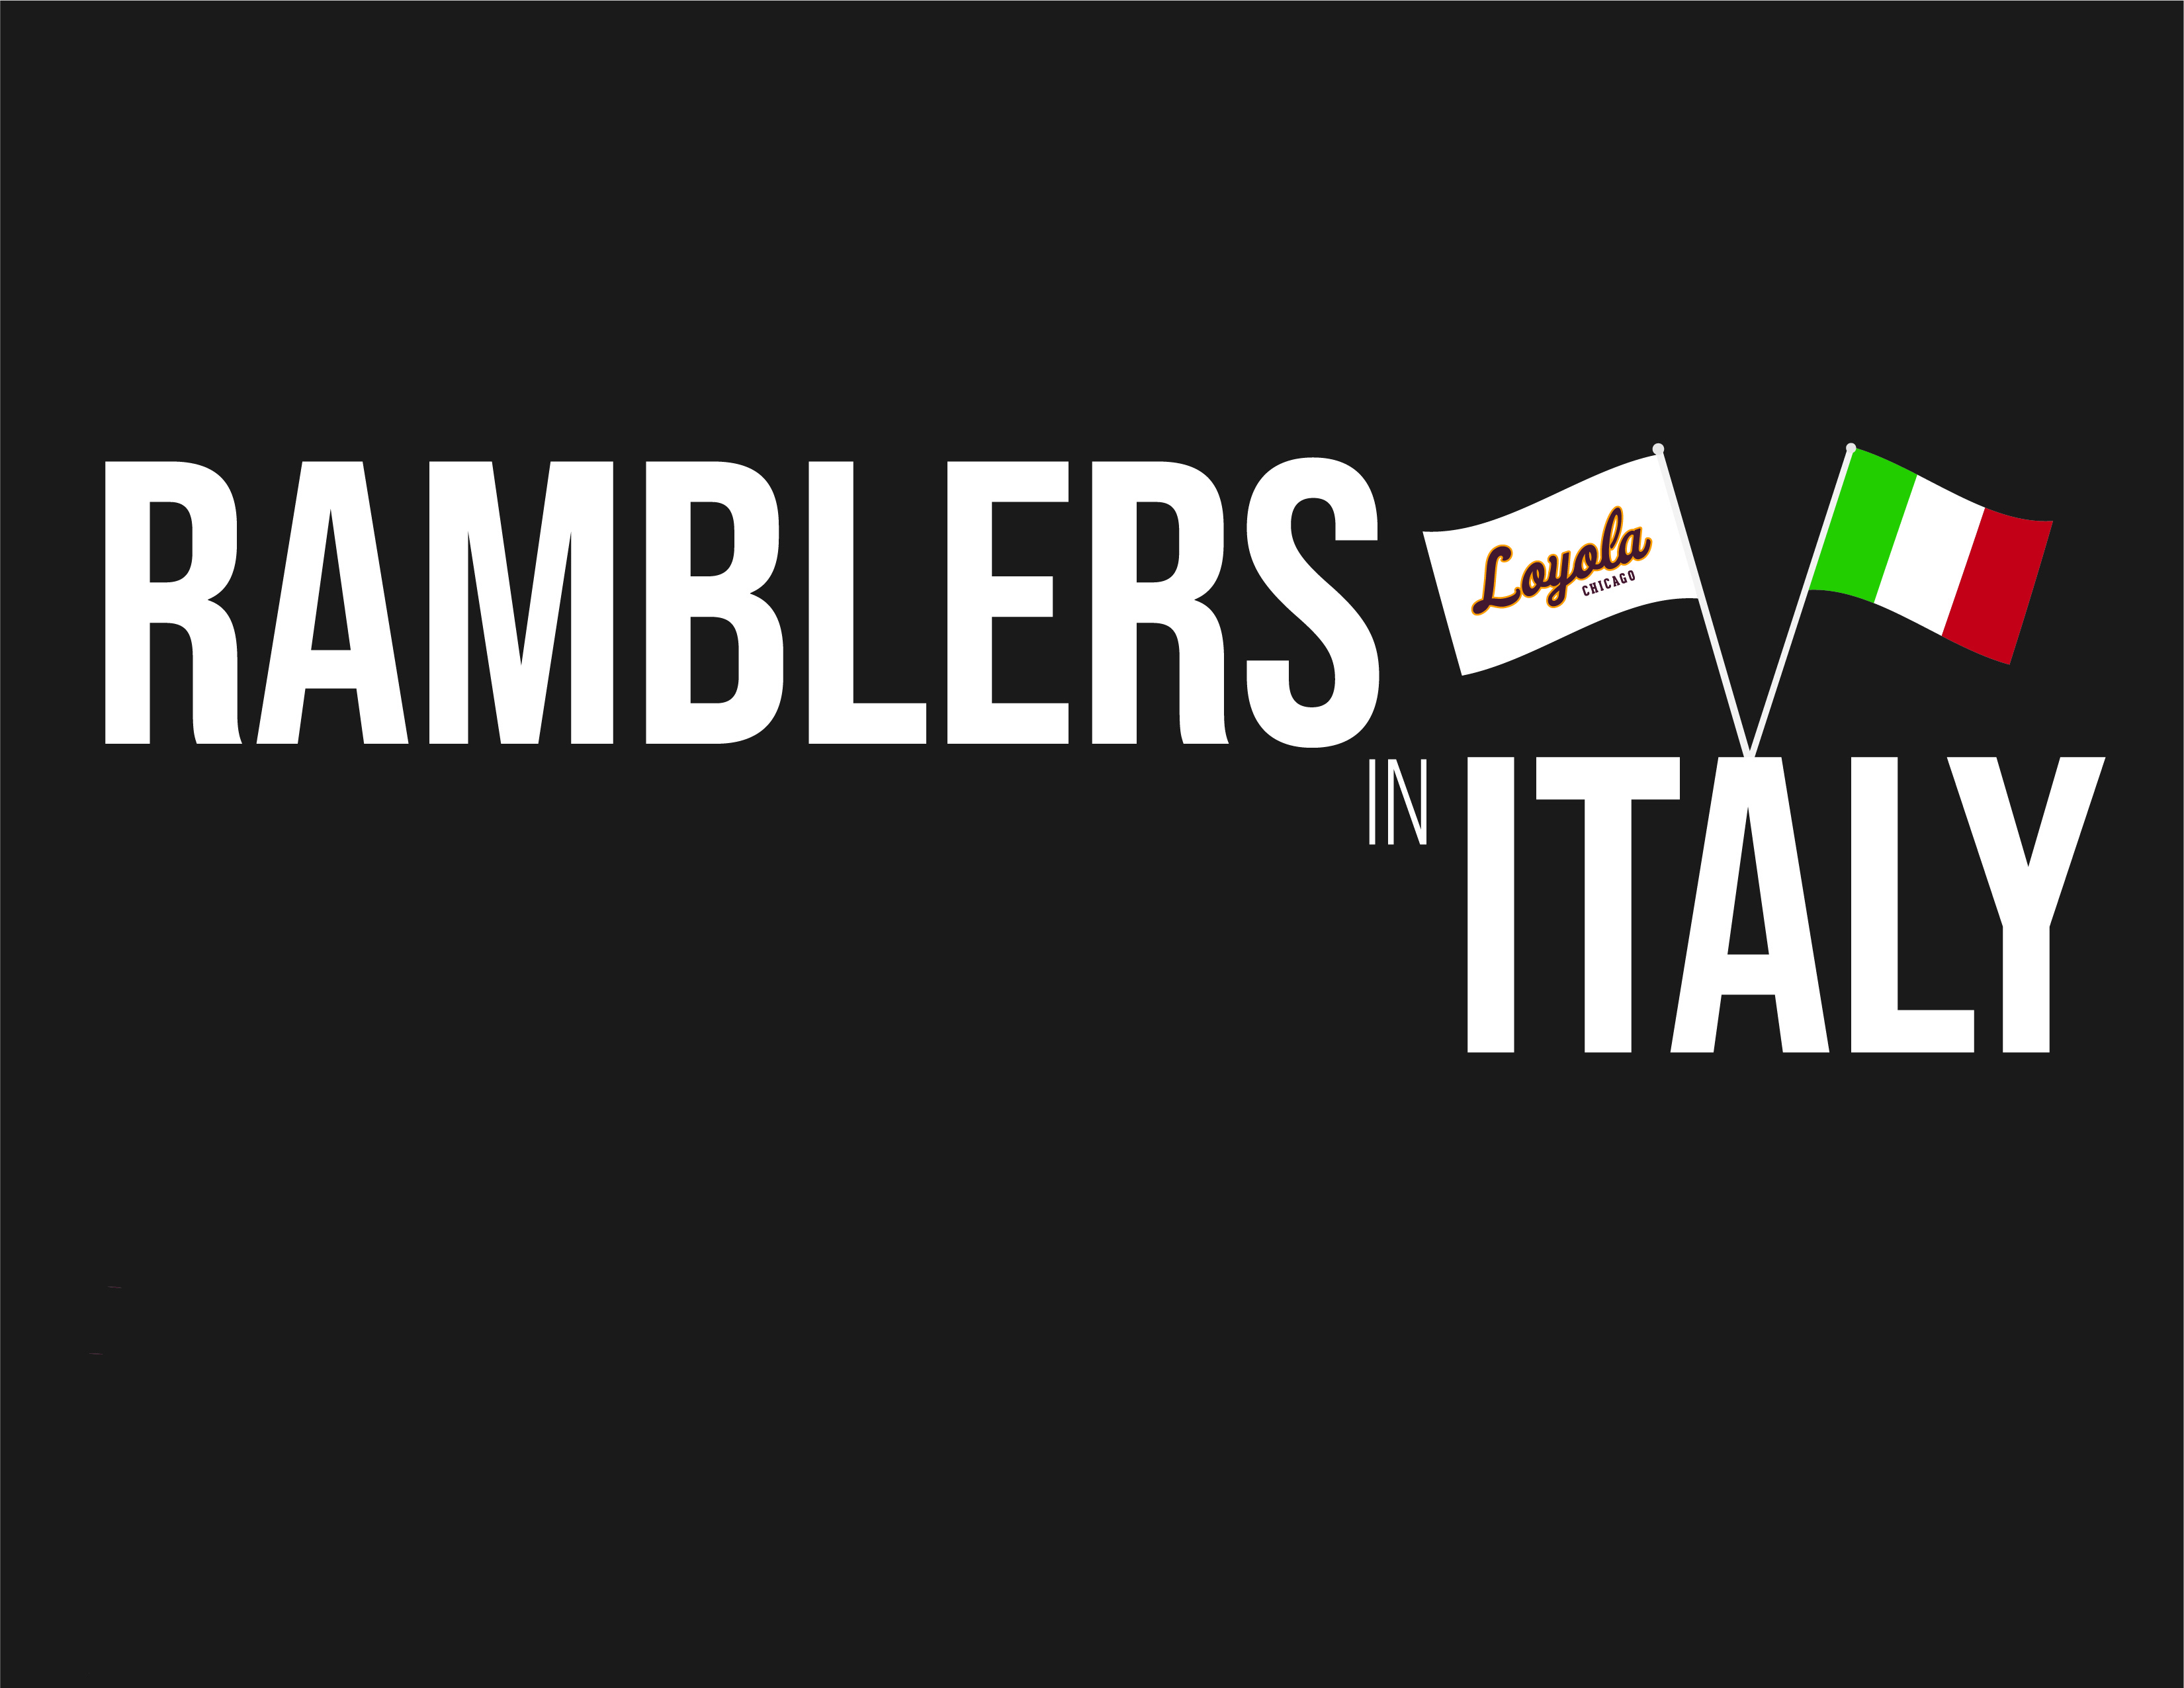 Ramblers in Italy